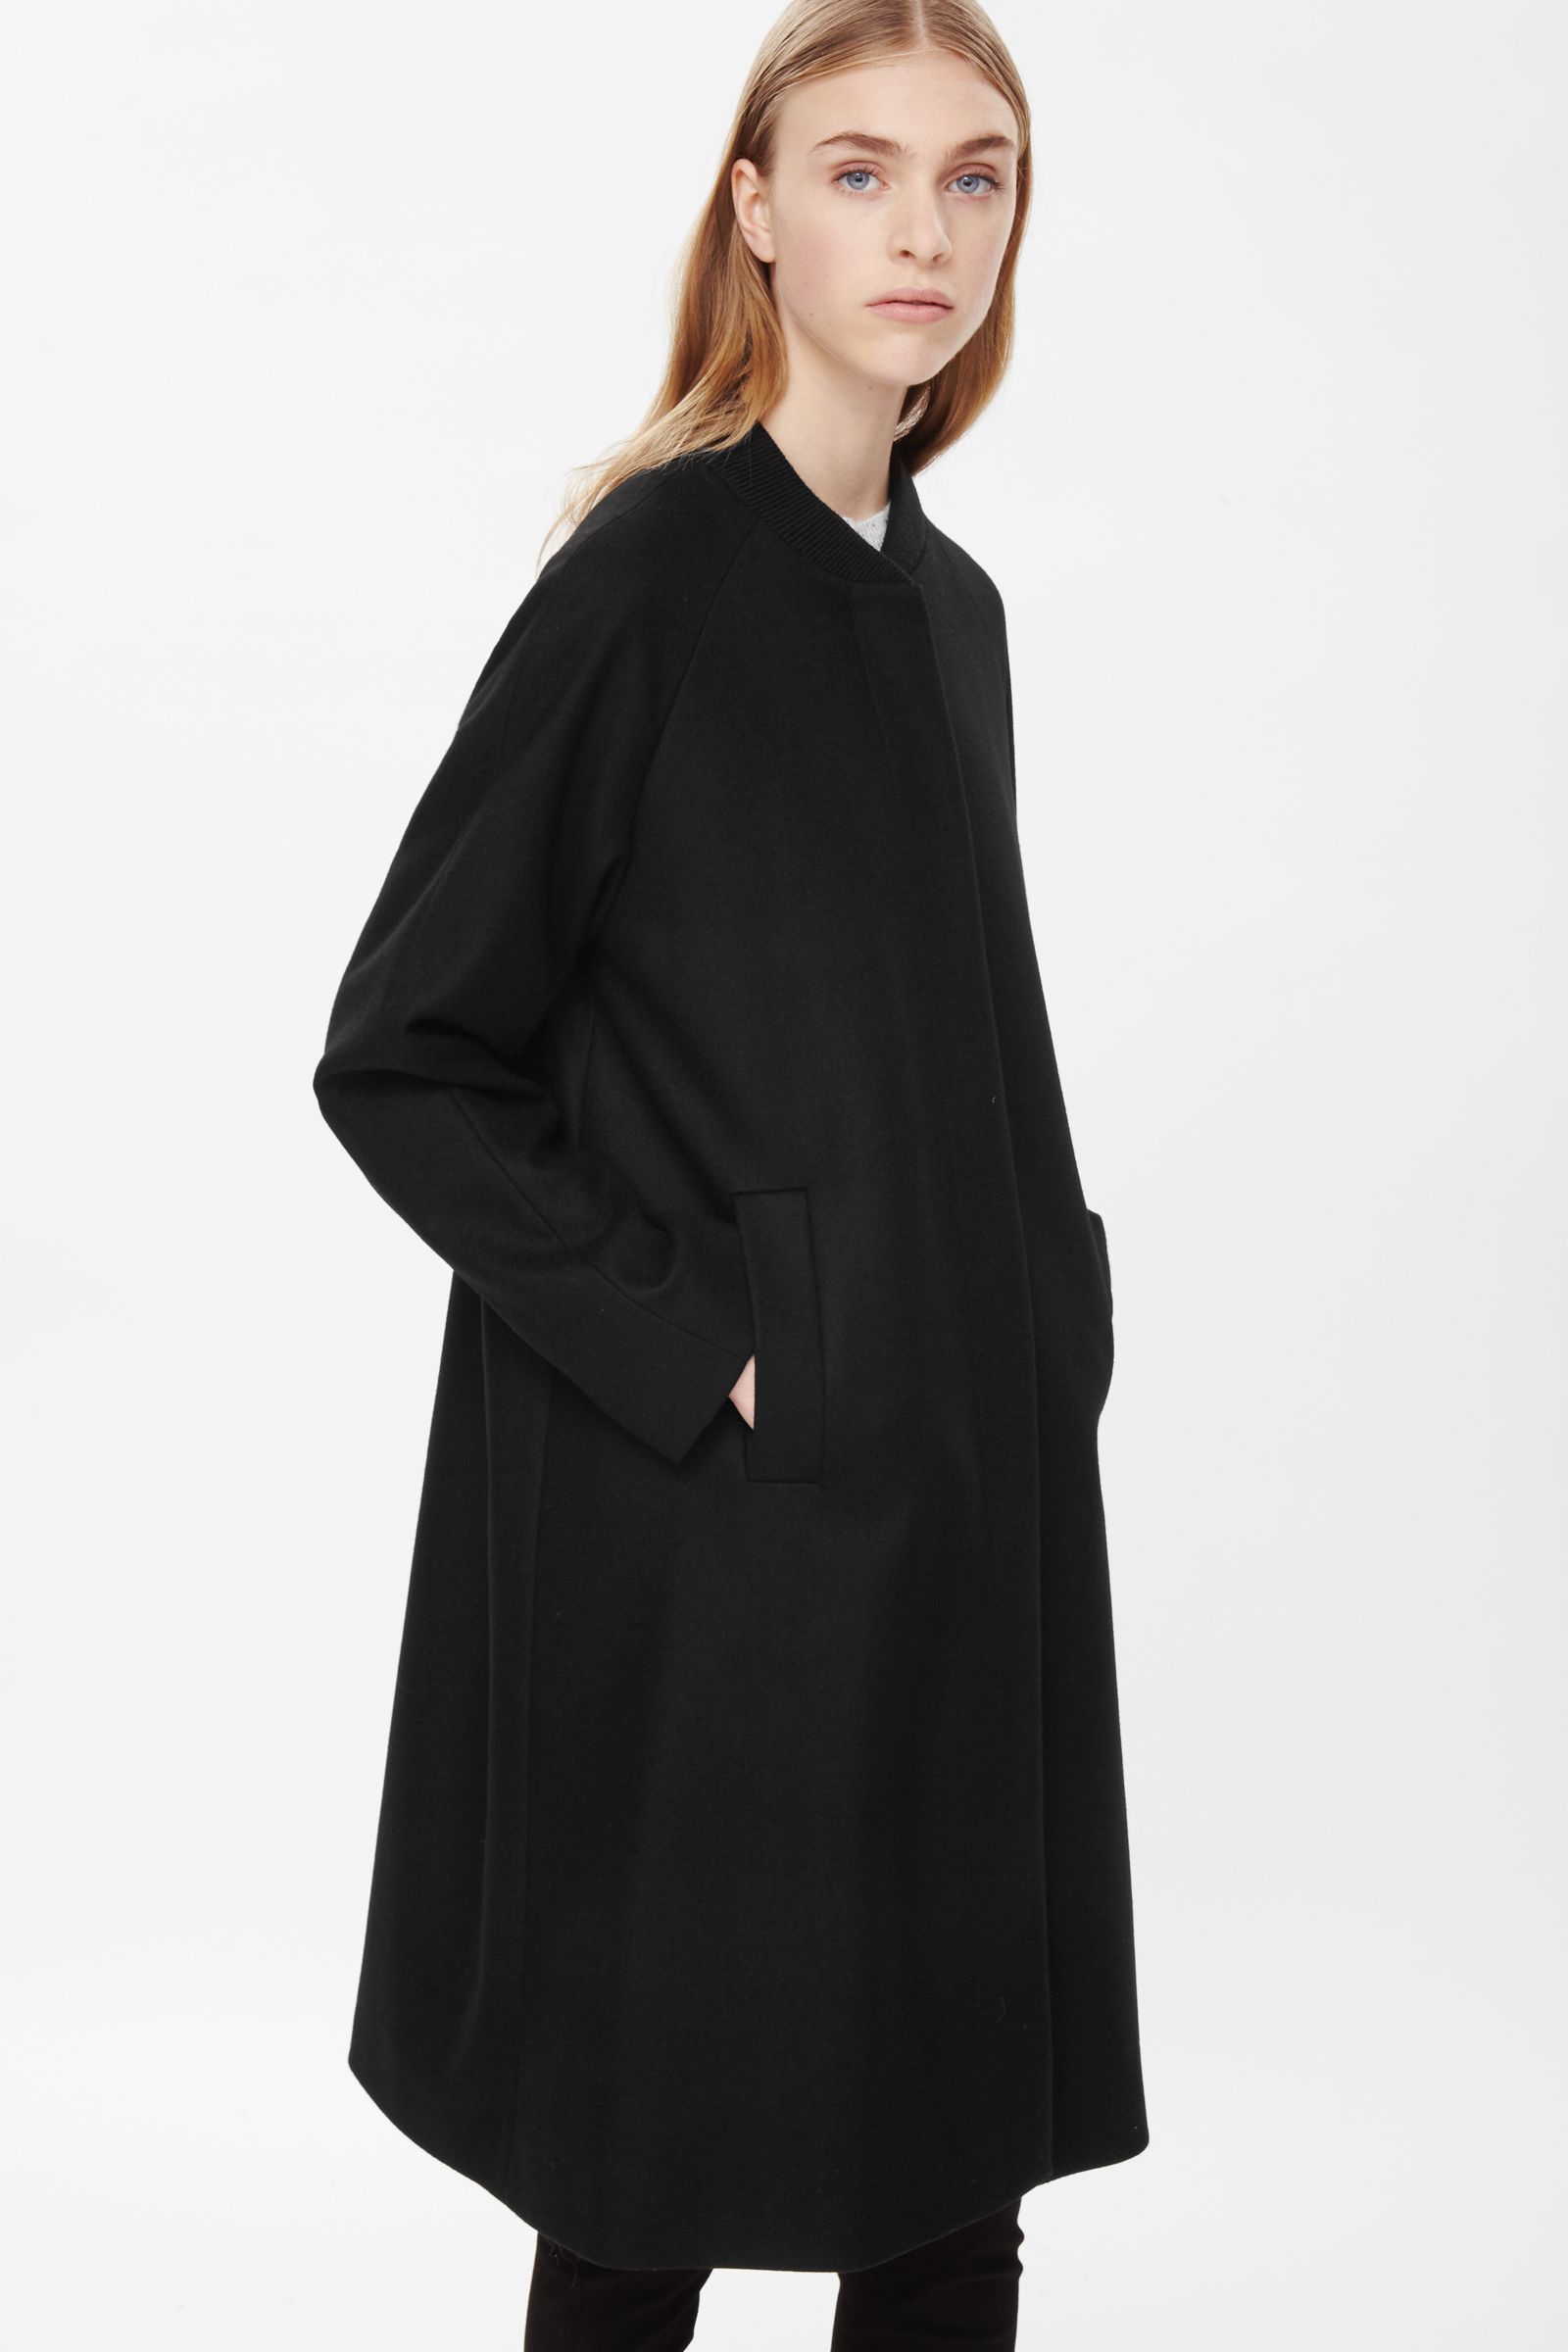 COS RIB-NECK WOOL COAT black | Style Point of View Blog